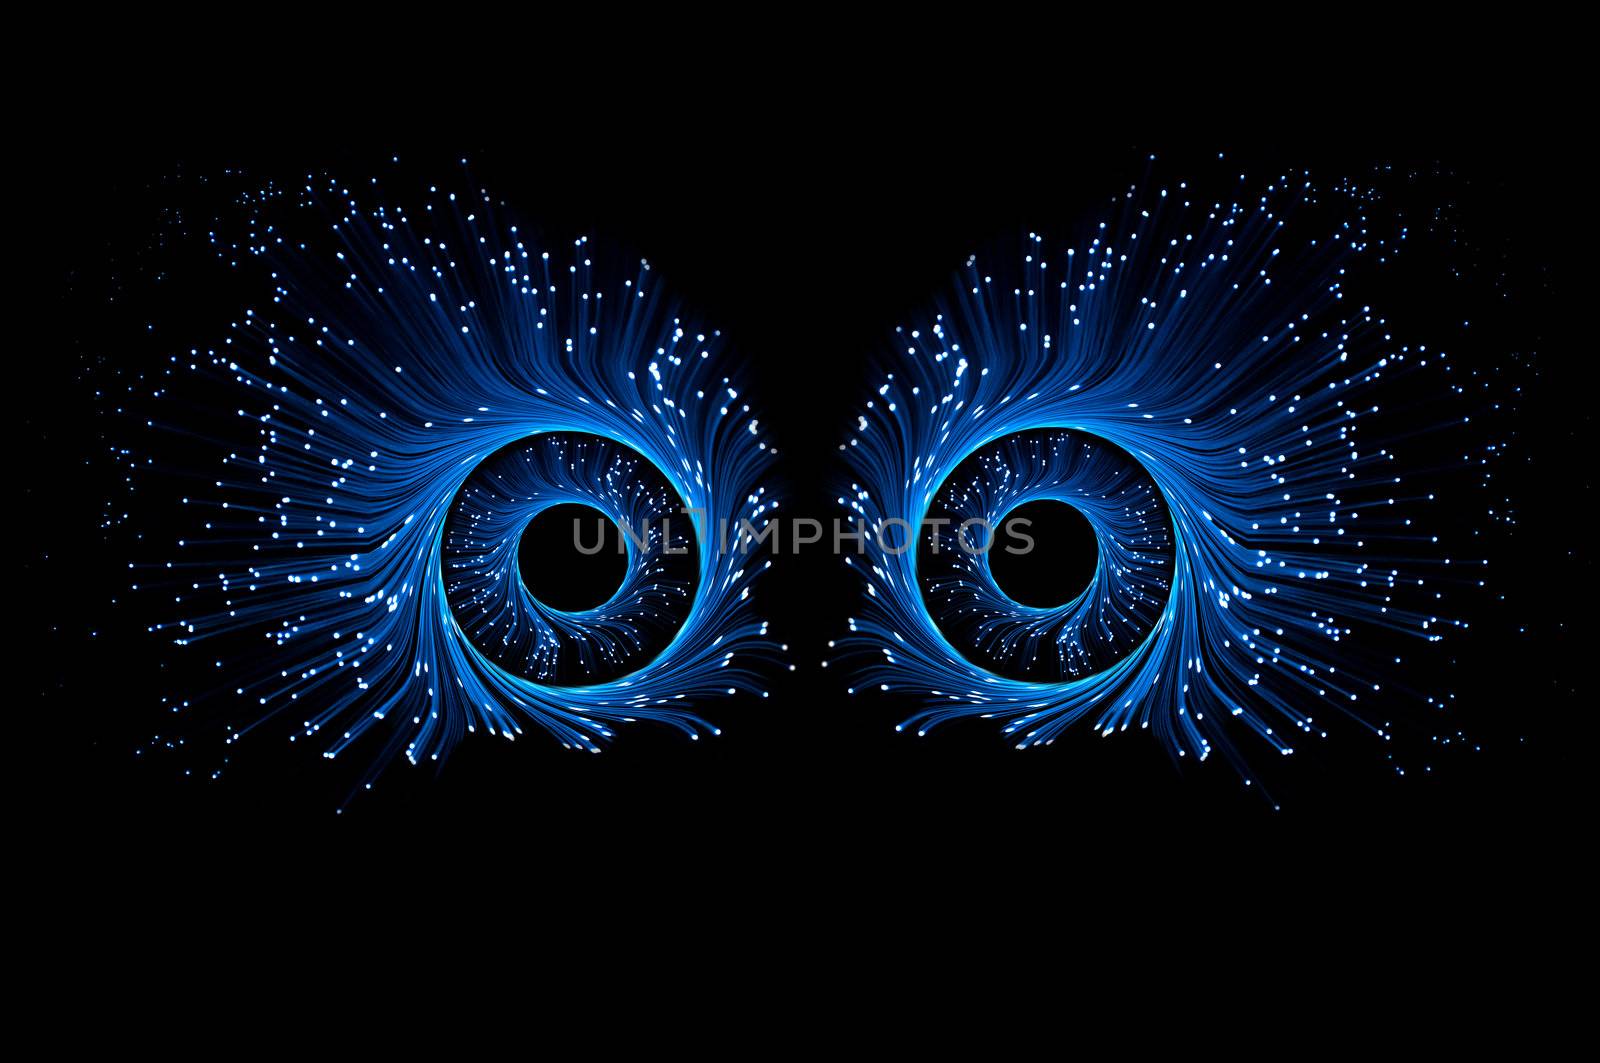 Two blue eyes composed from illuminated fibre optic light strands against a black background.